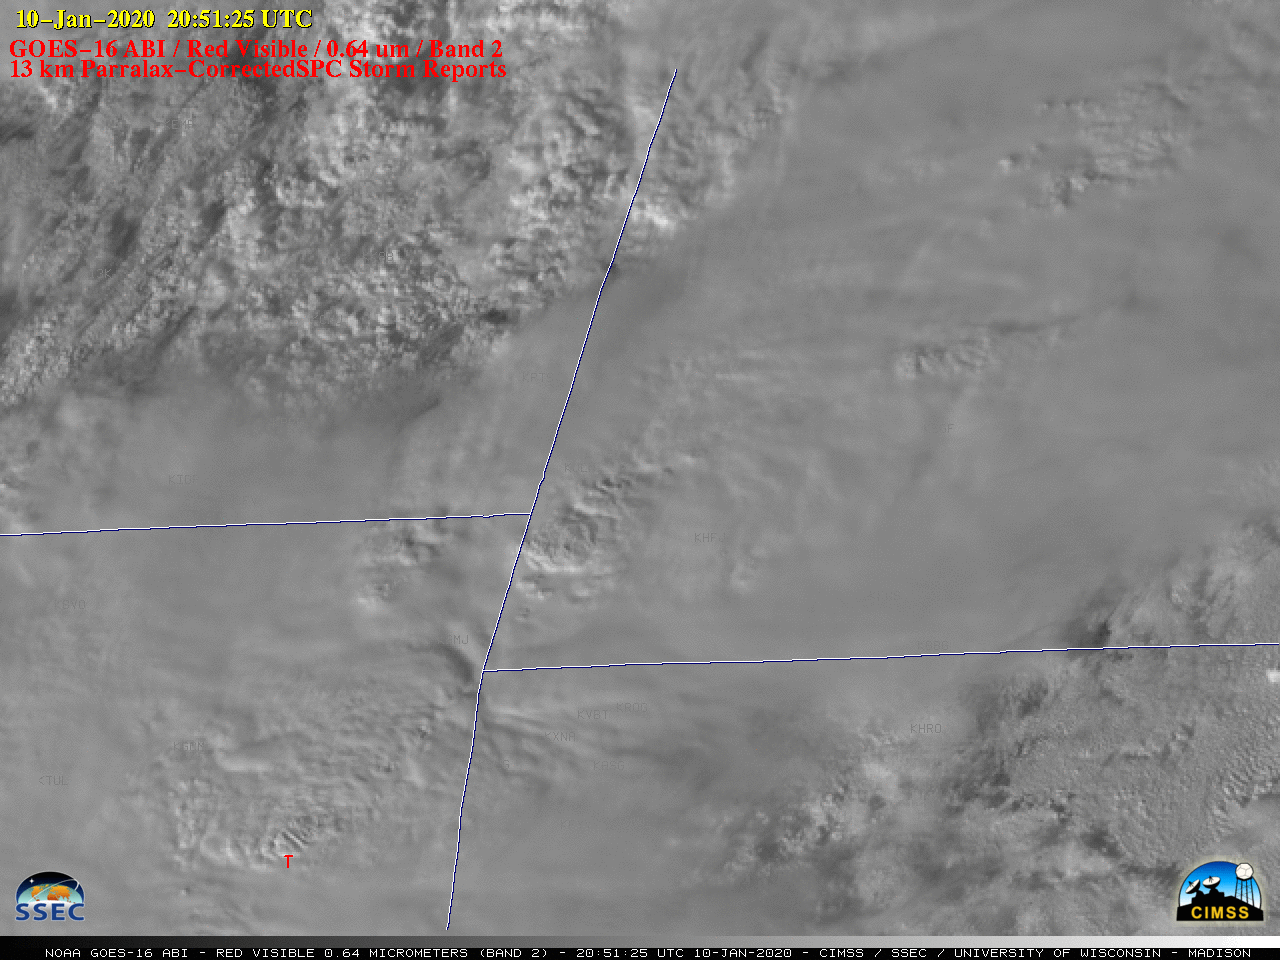 GOES-16 "Red" Visible (0.64 µm) images, including plot of SPC Storm Reports (with and without parallax correction) [click to play animation]